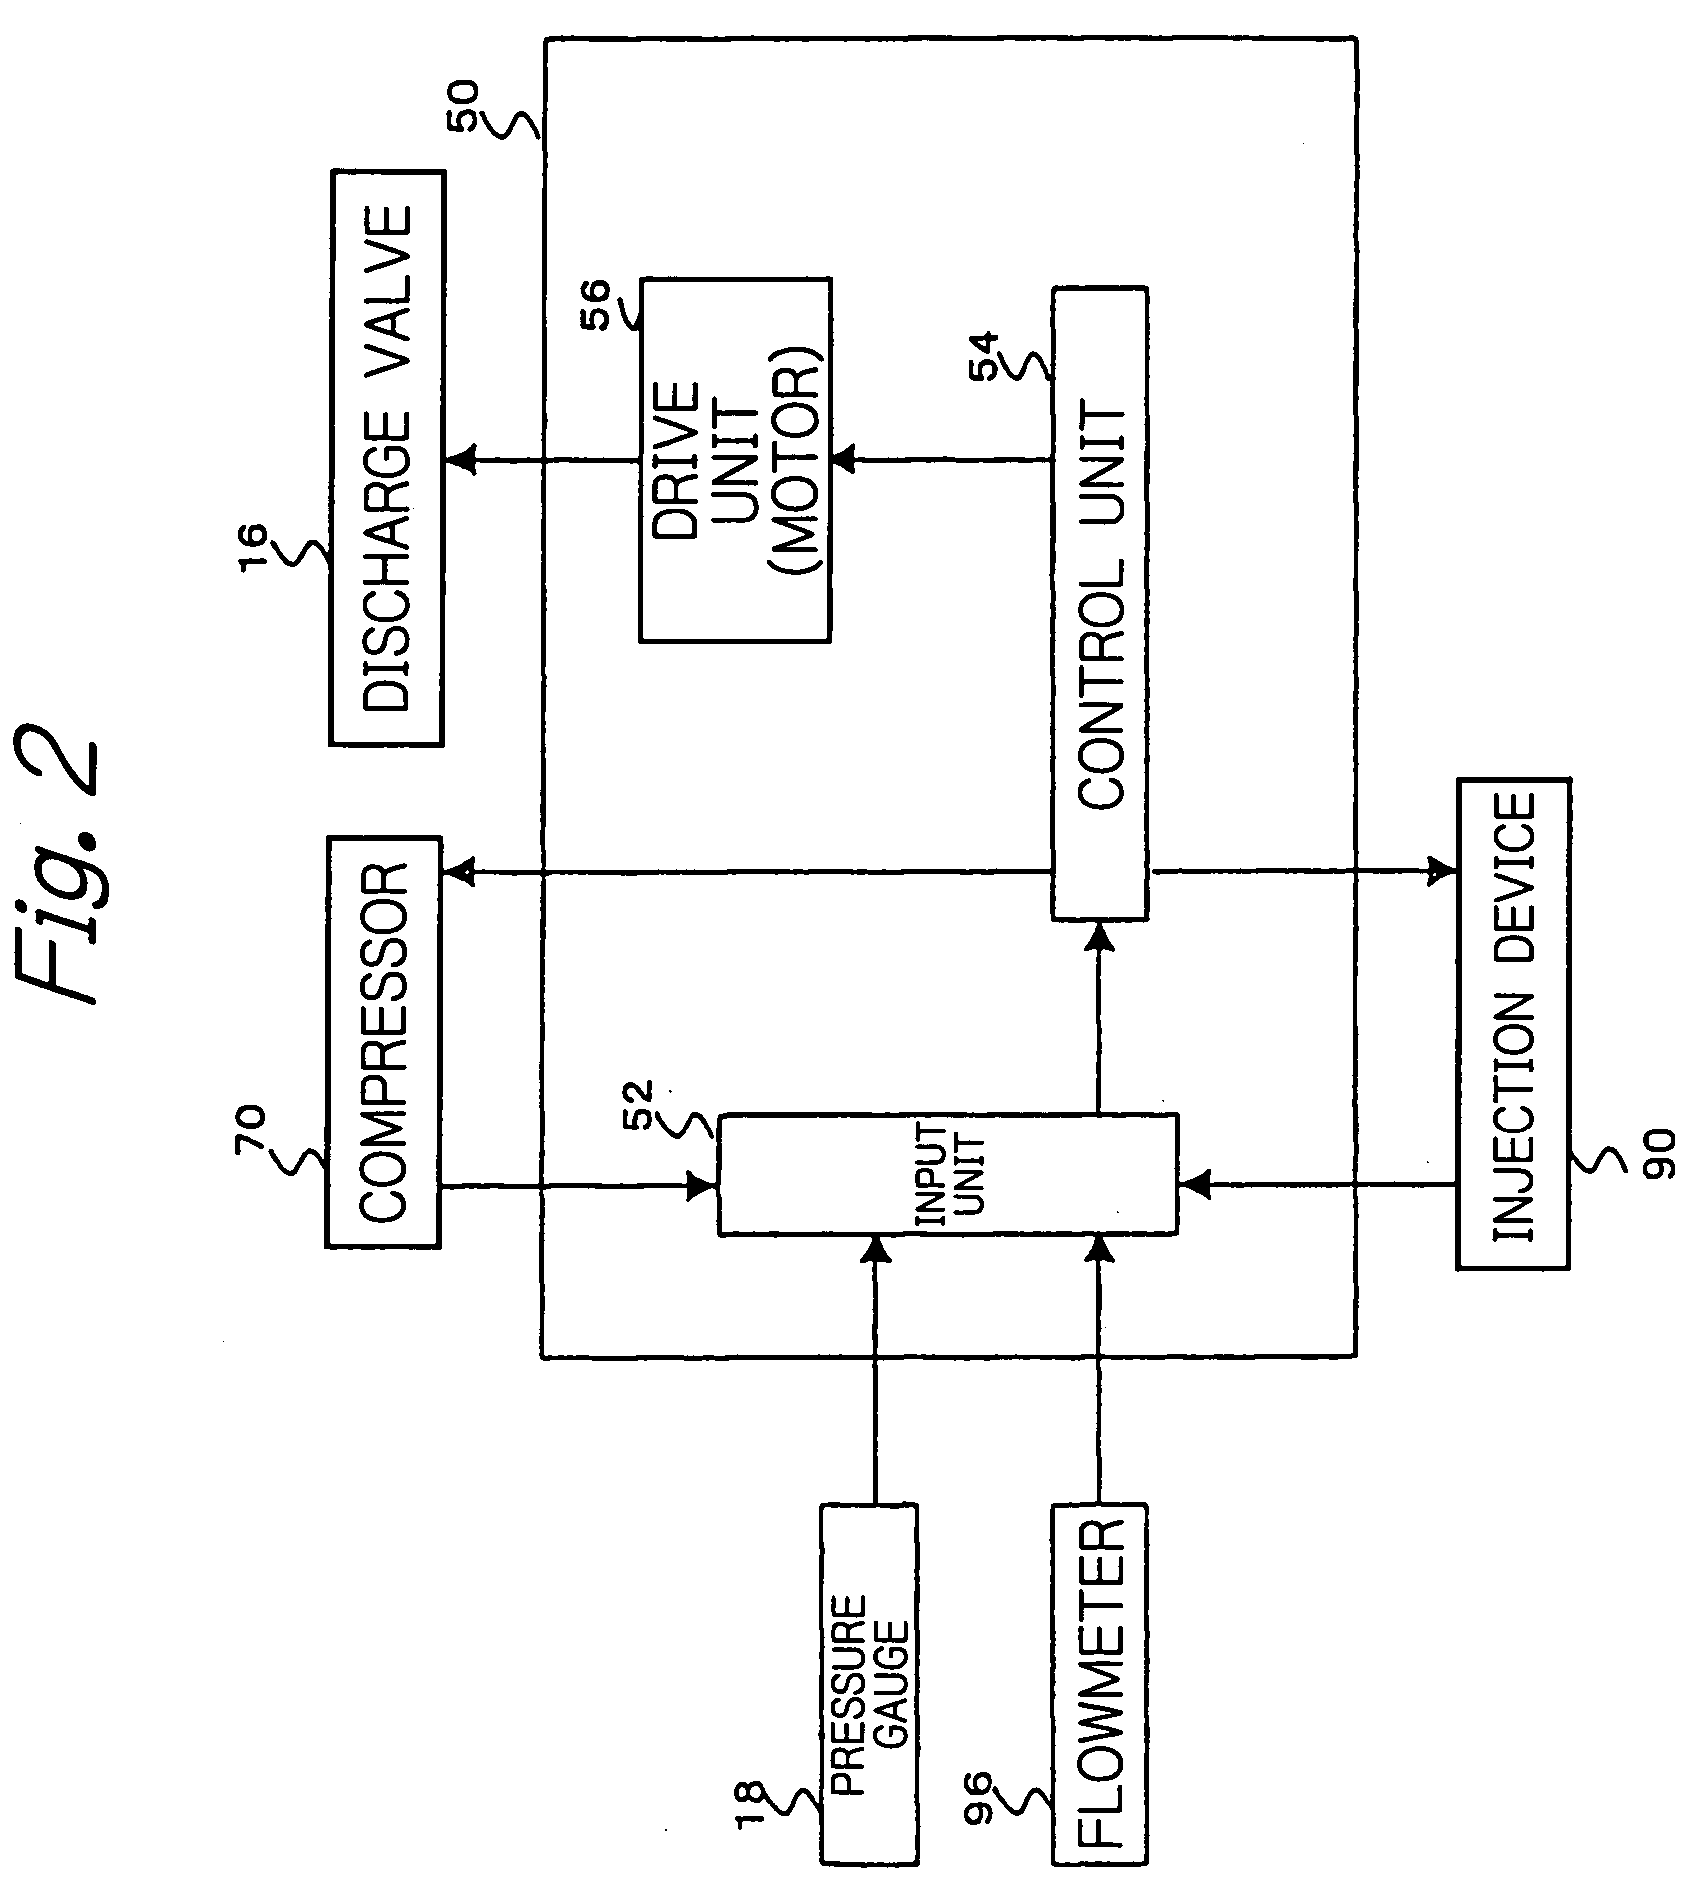 Method and apparatus for foam molding